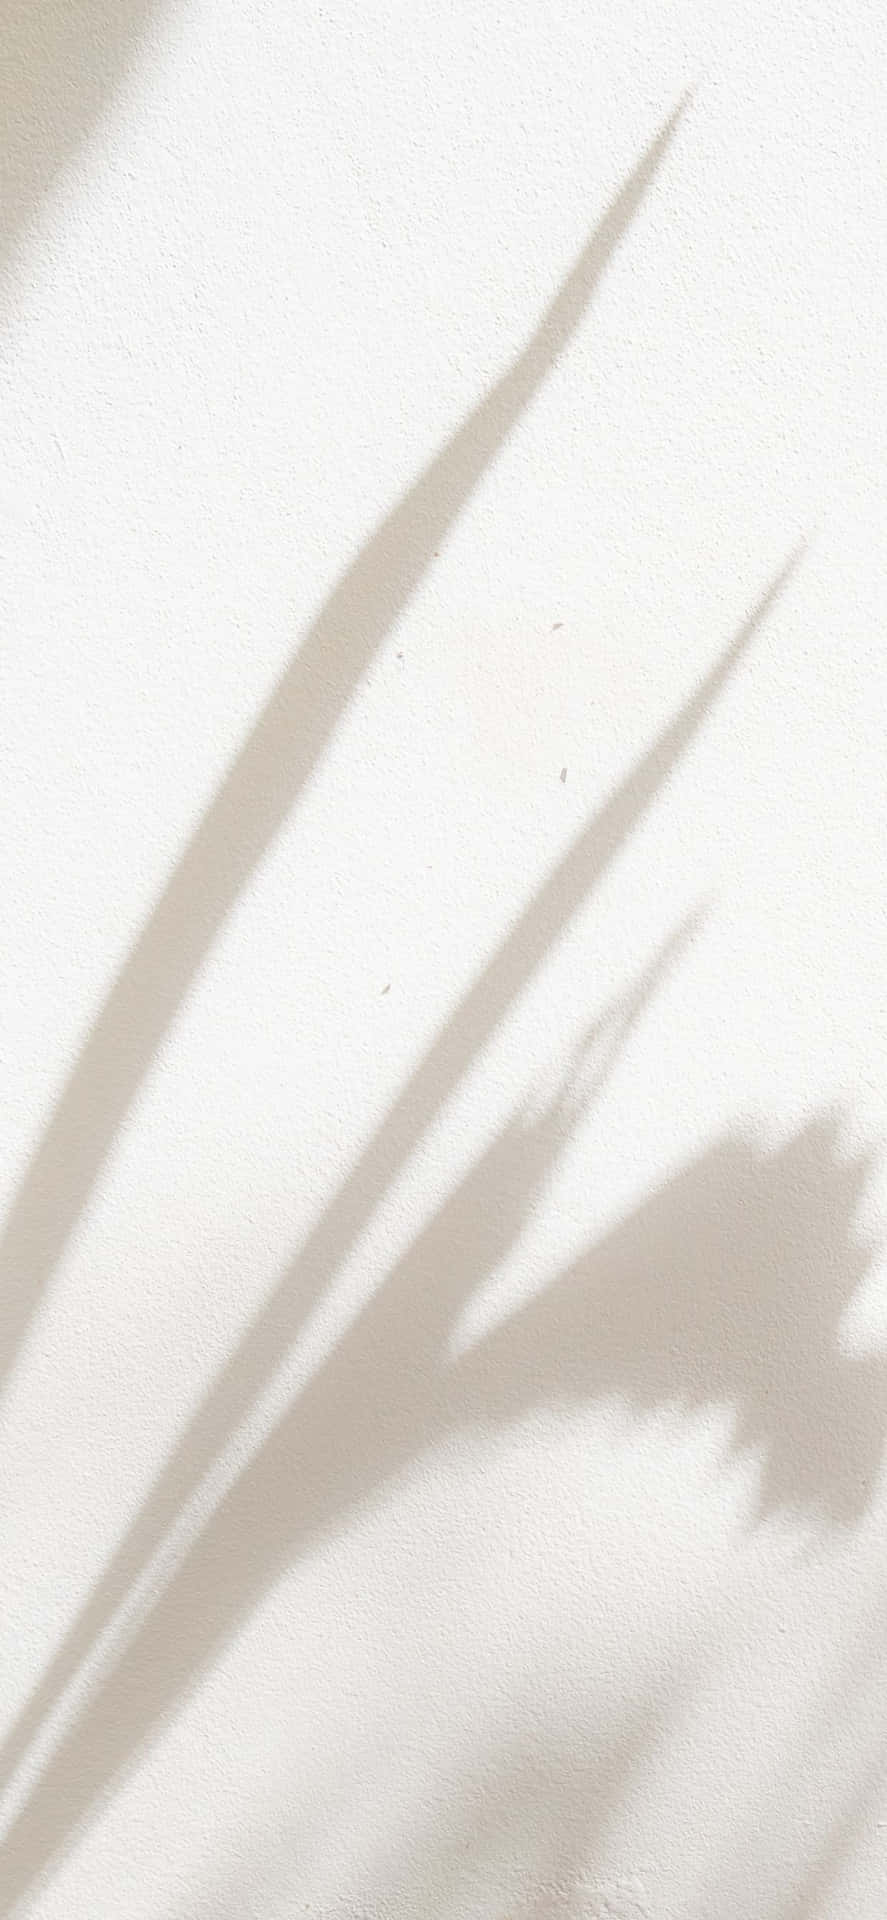 A Shadow Of A Plant On A White Wall Wallpaper